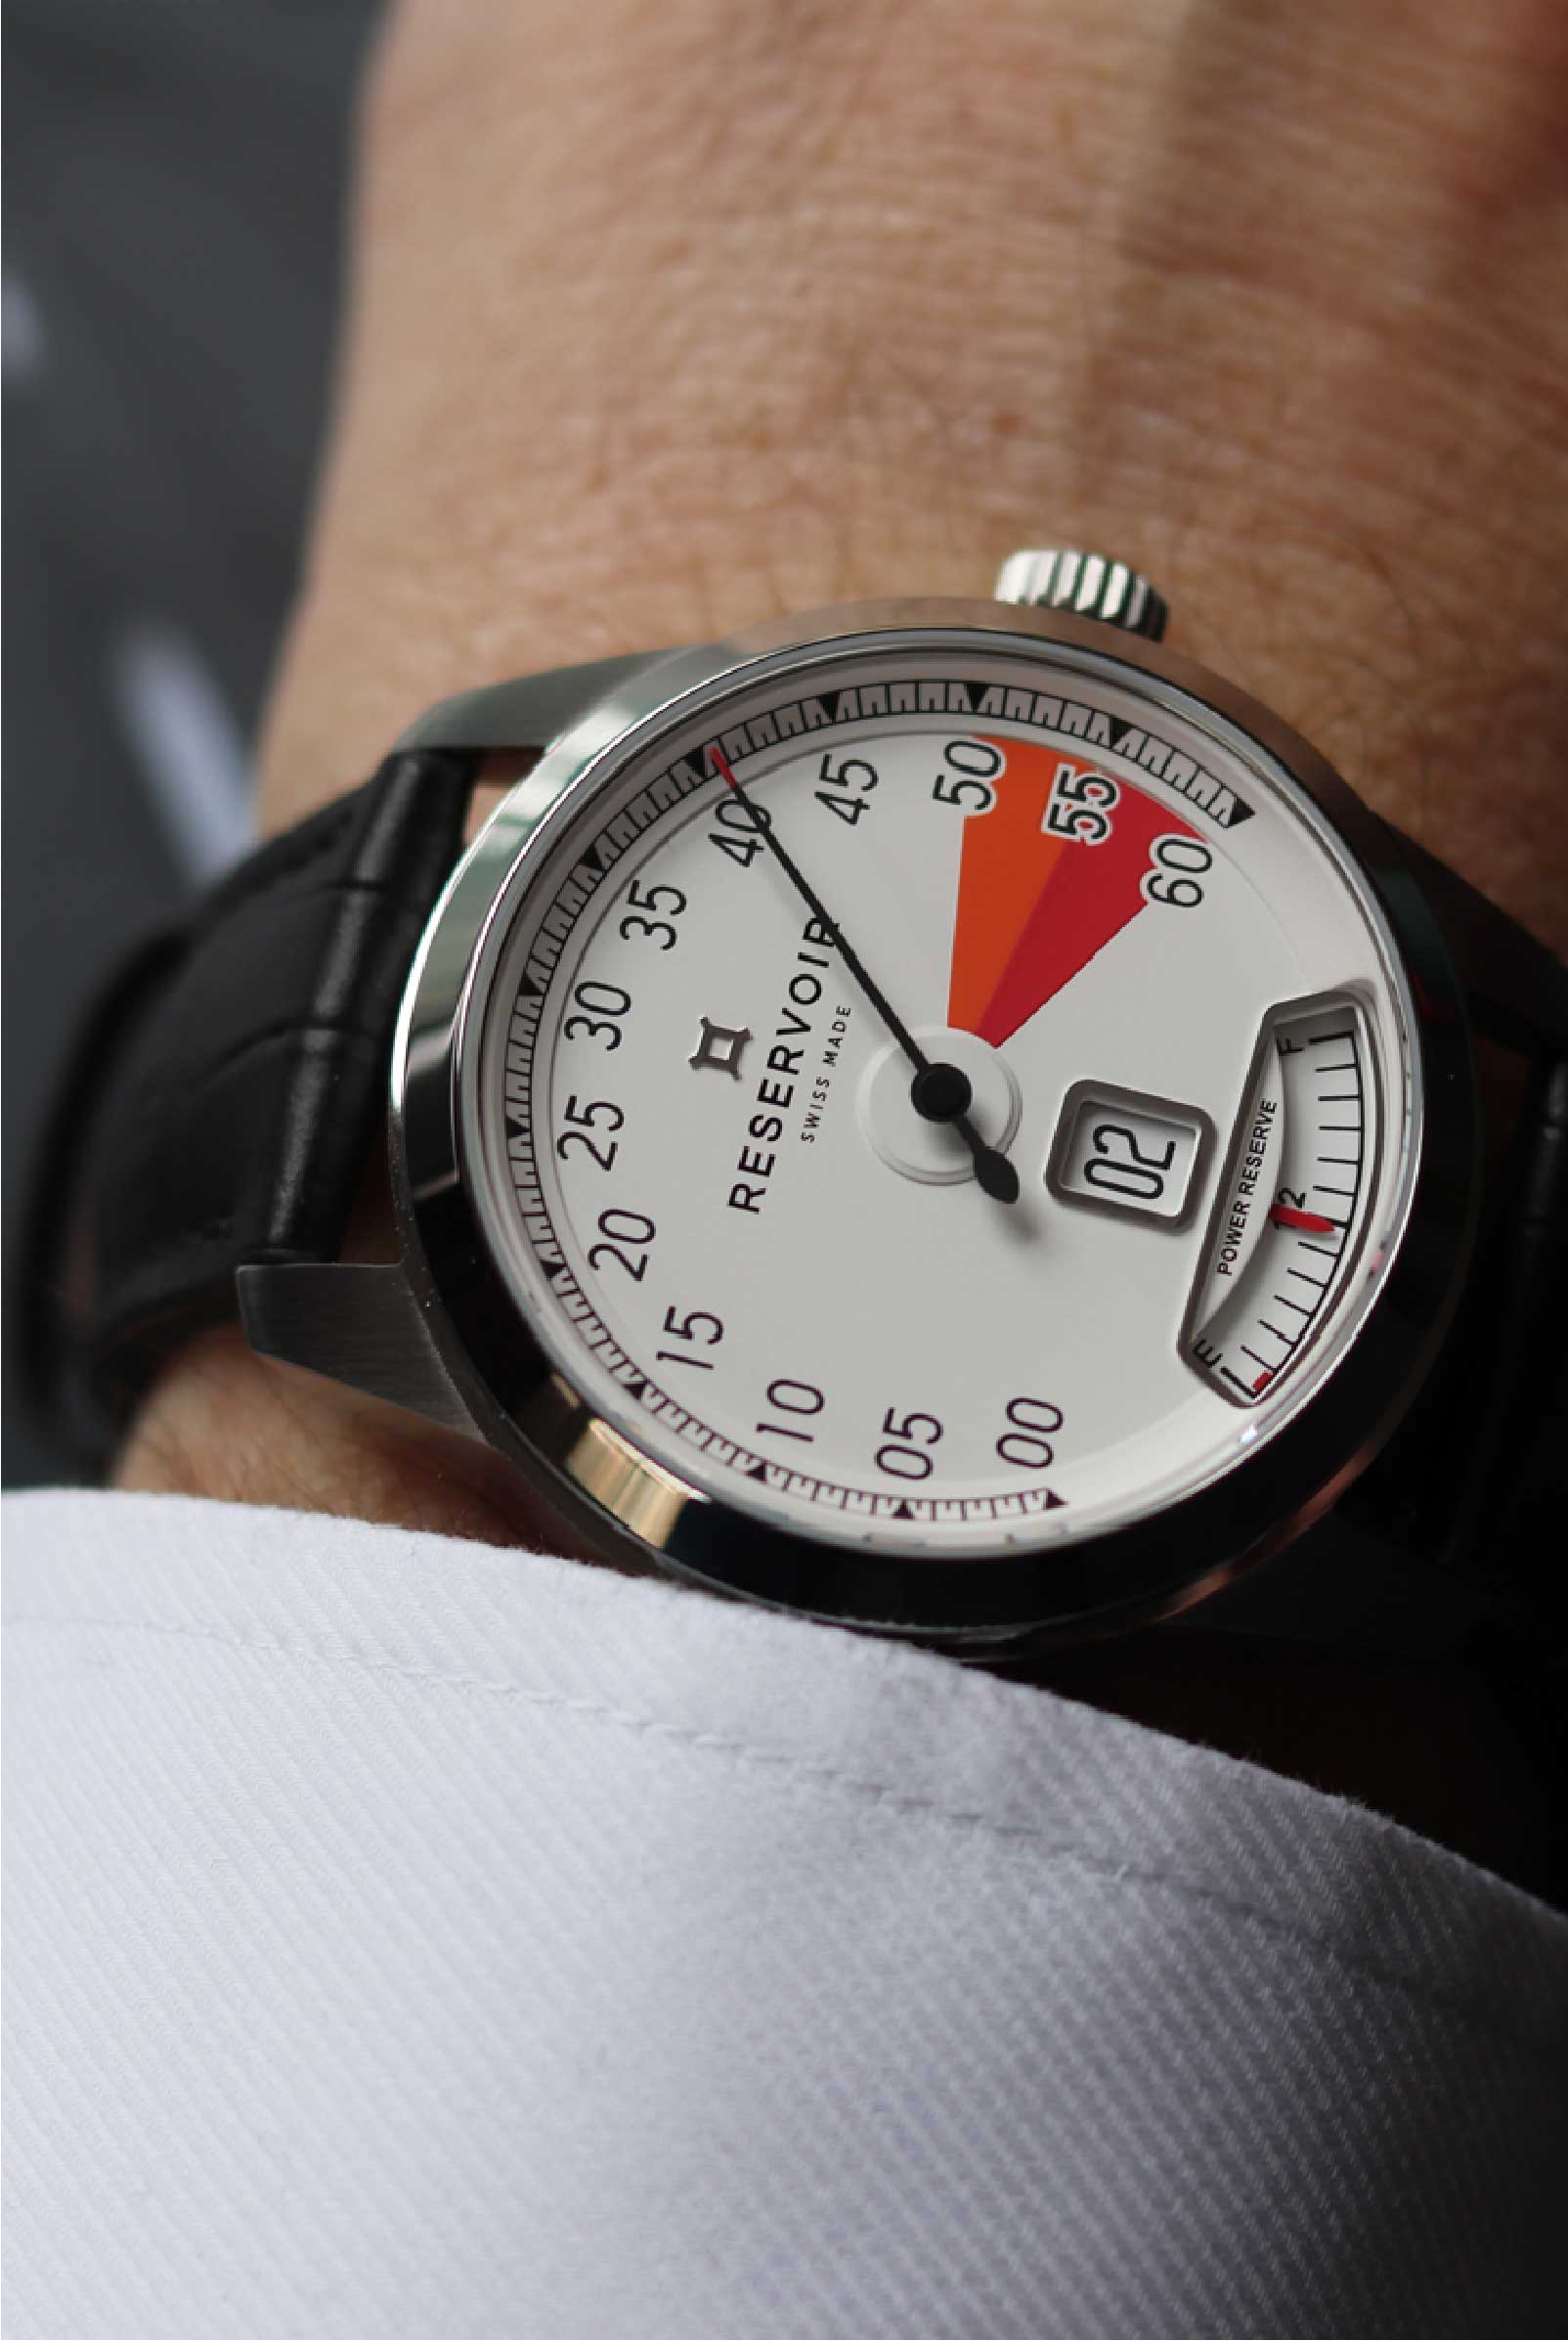 Vintage car rpm counter, black and dark brown watch, luxury light taupe details.